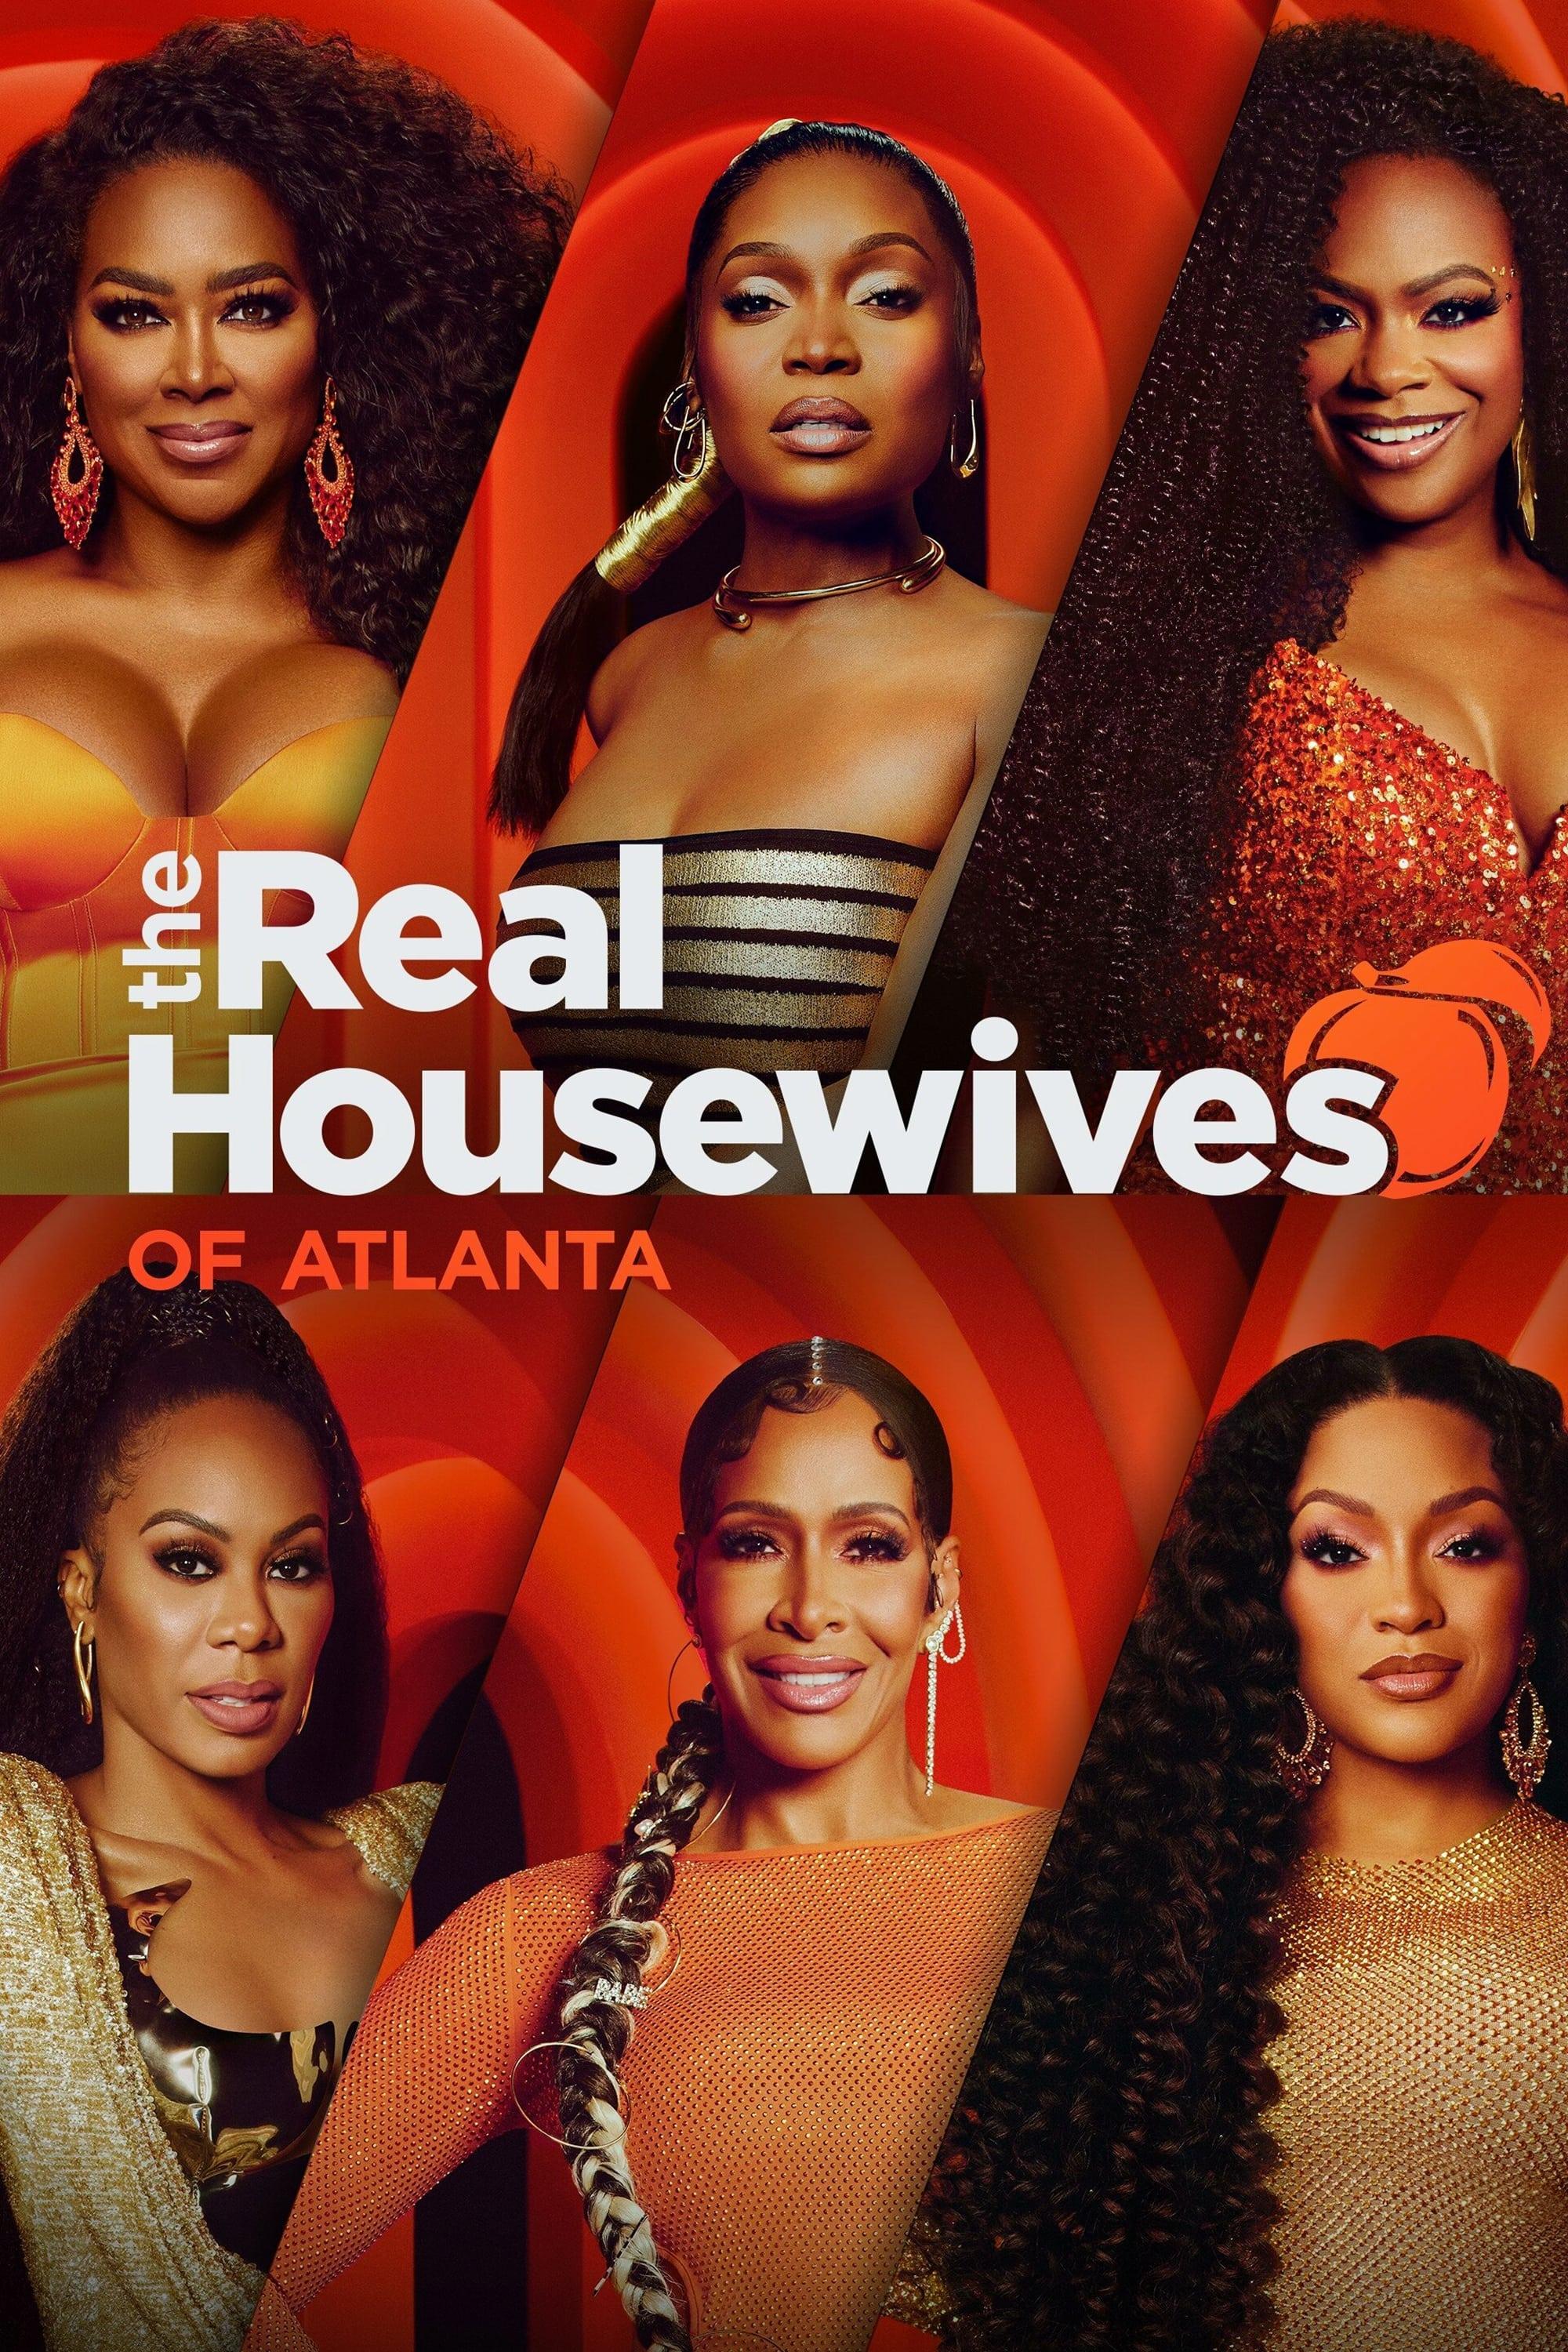 The Real Housewives of Atlanta poster